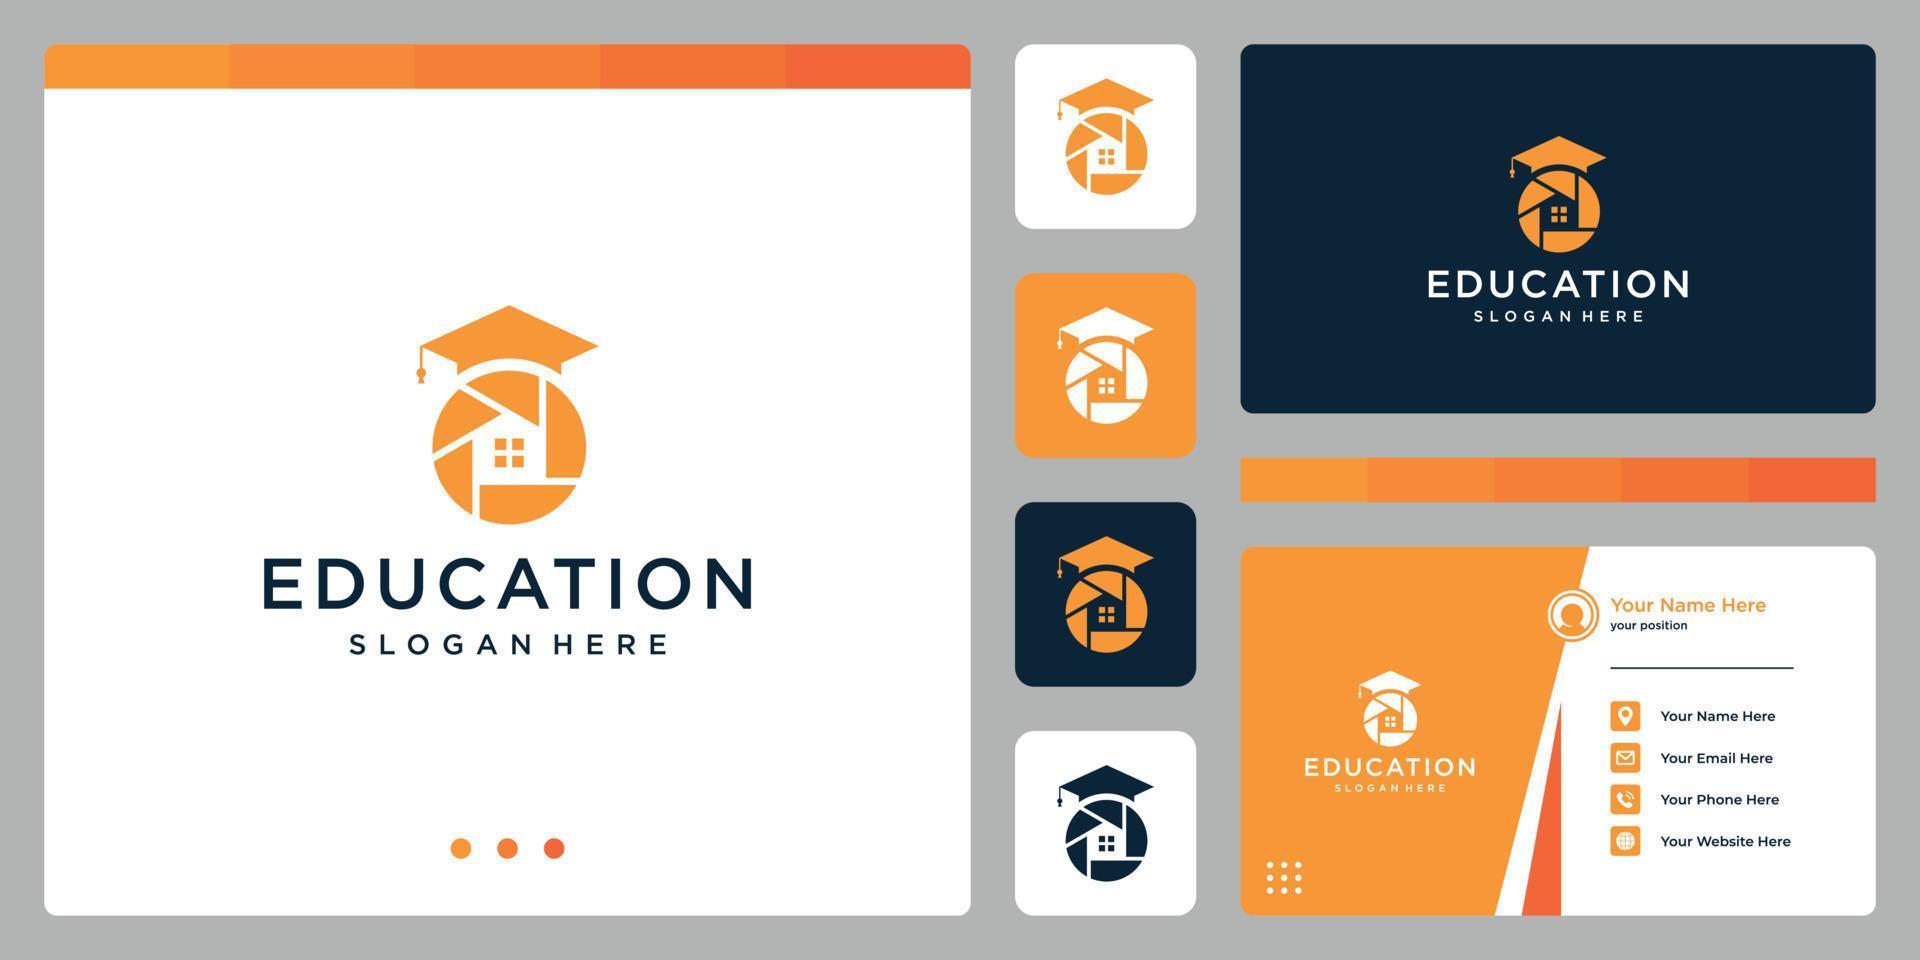 College, Graduate, Campus, Education logo design. and photography, house logo. Business card vector